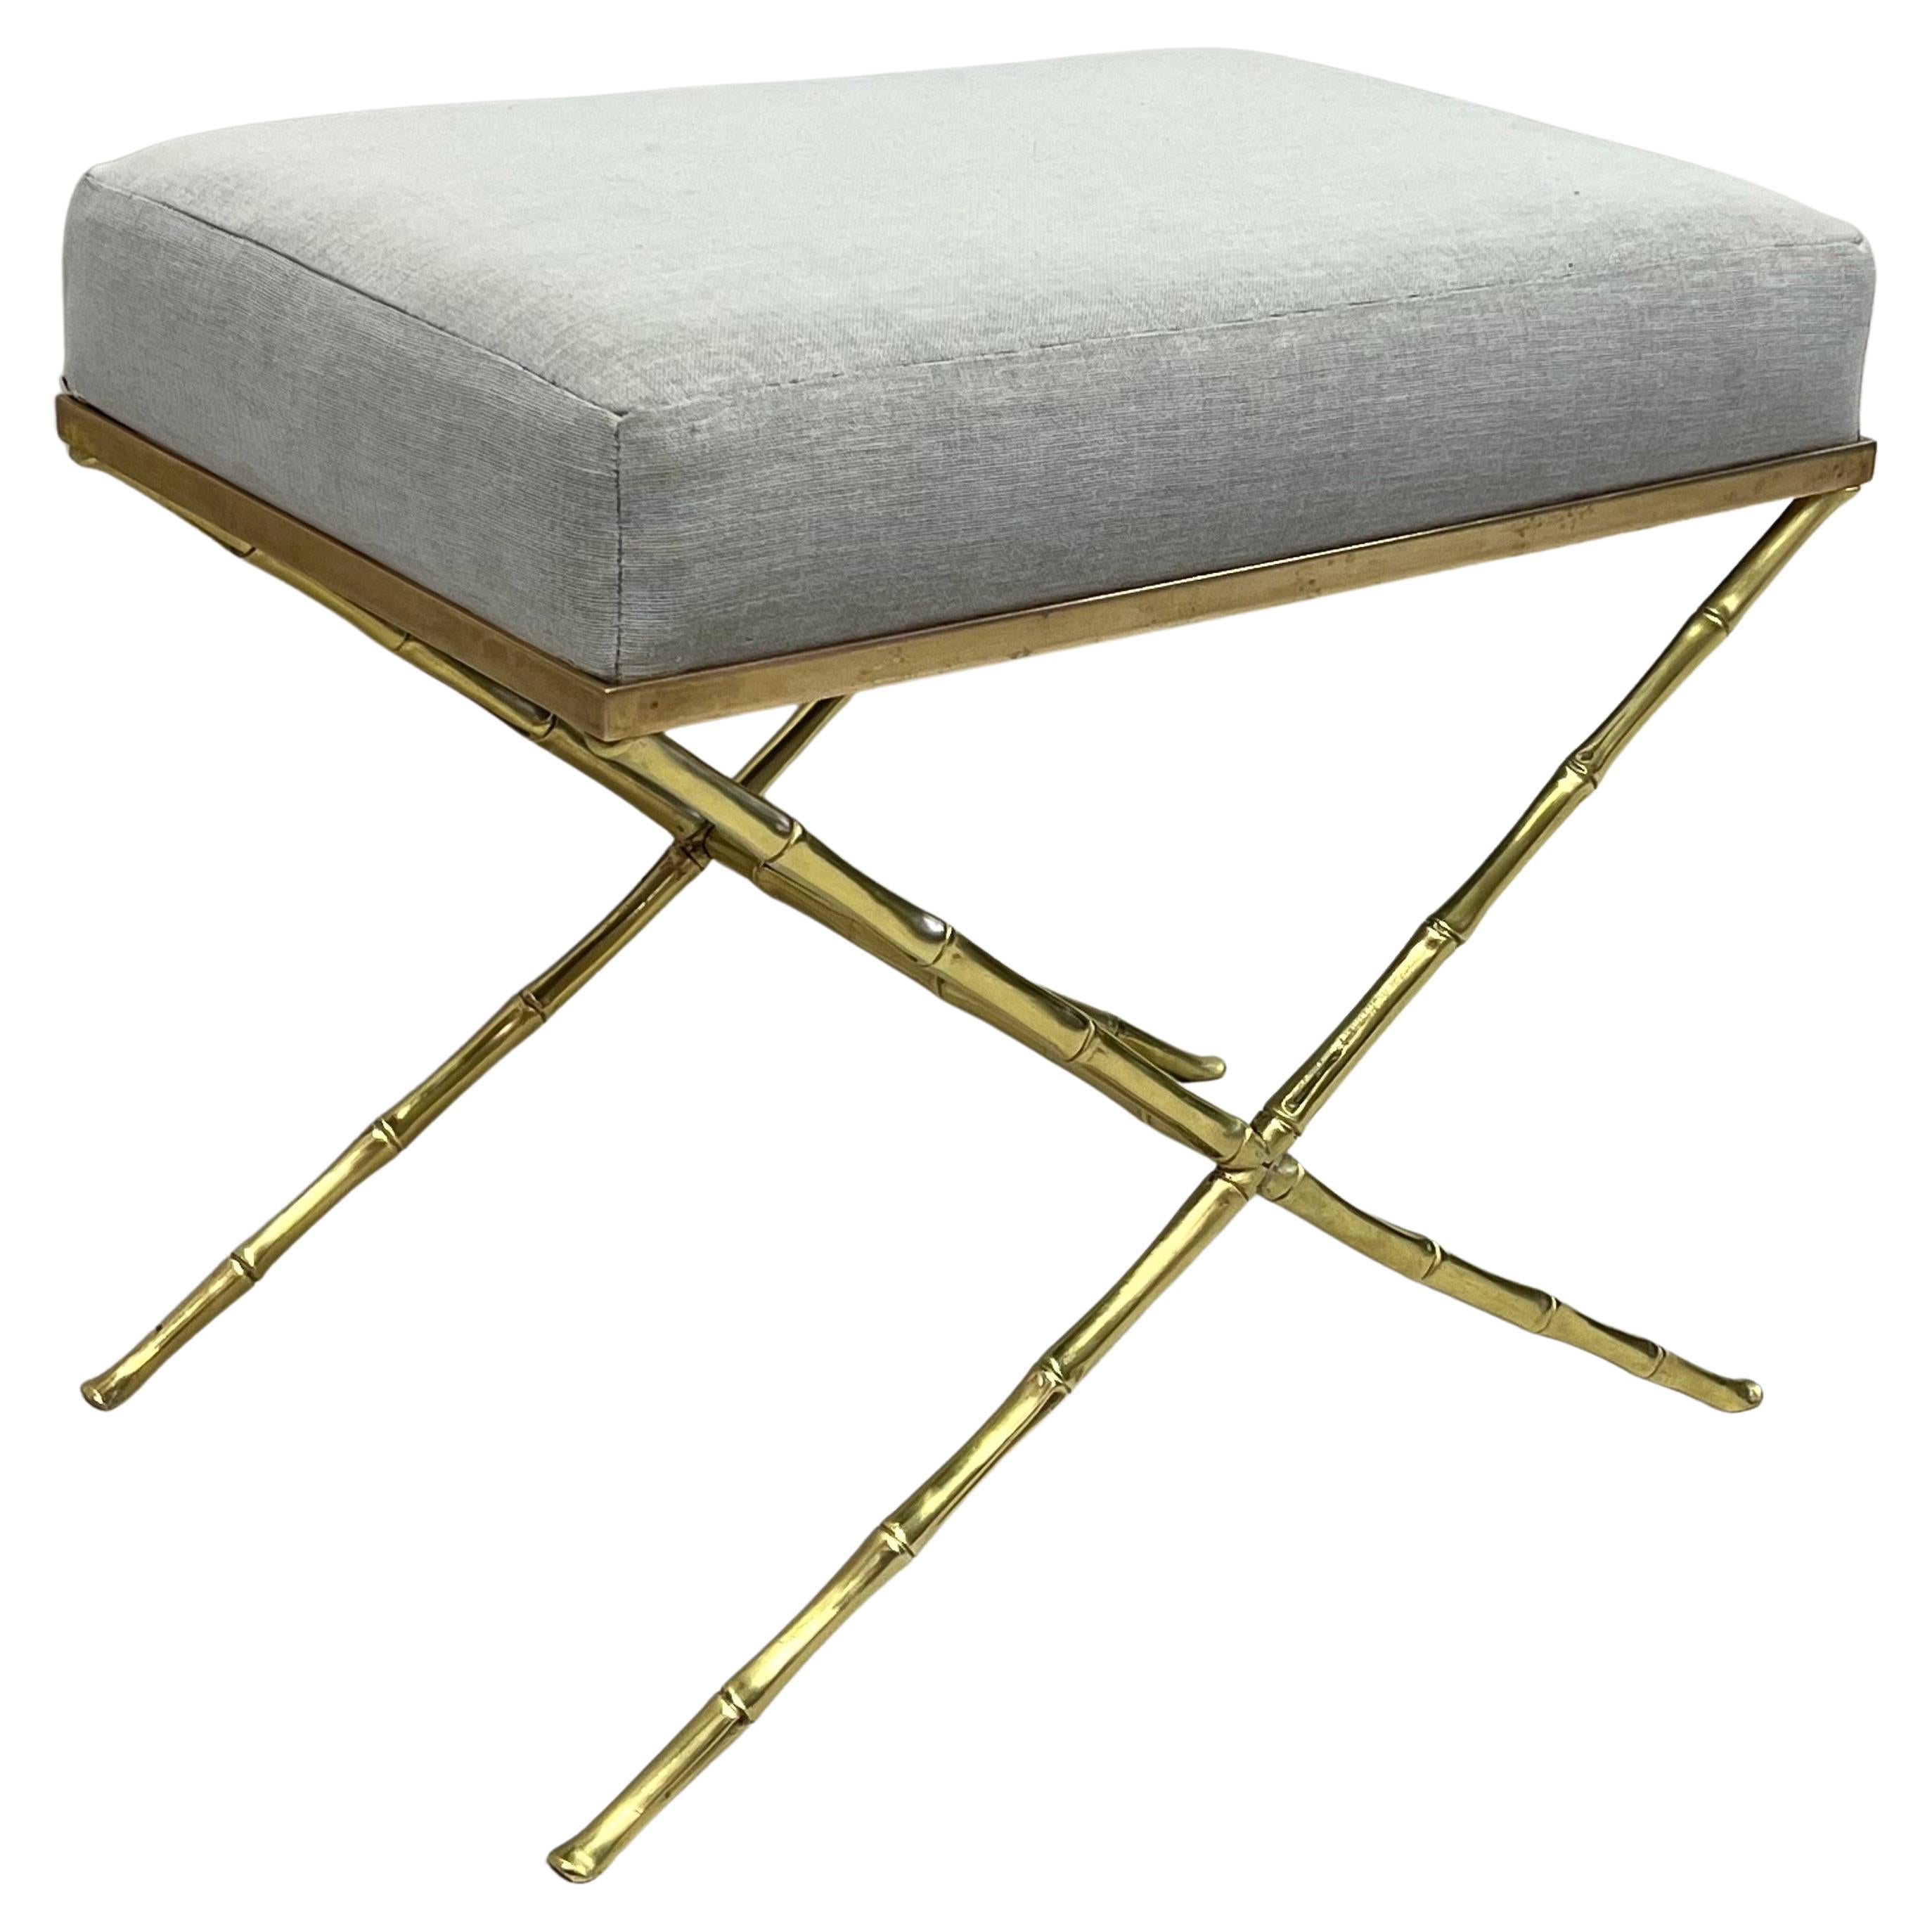 French Mid-Century Modern Neoclassical Brass Faux Bamboo Bench by Maison Baguès For Sale